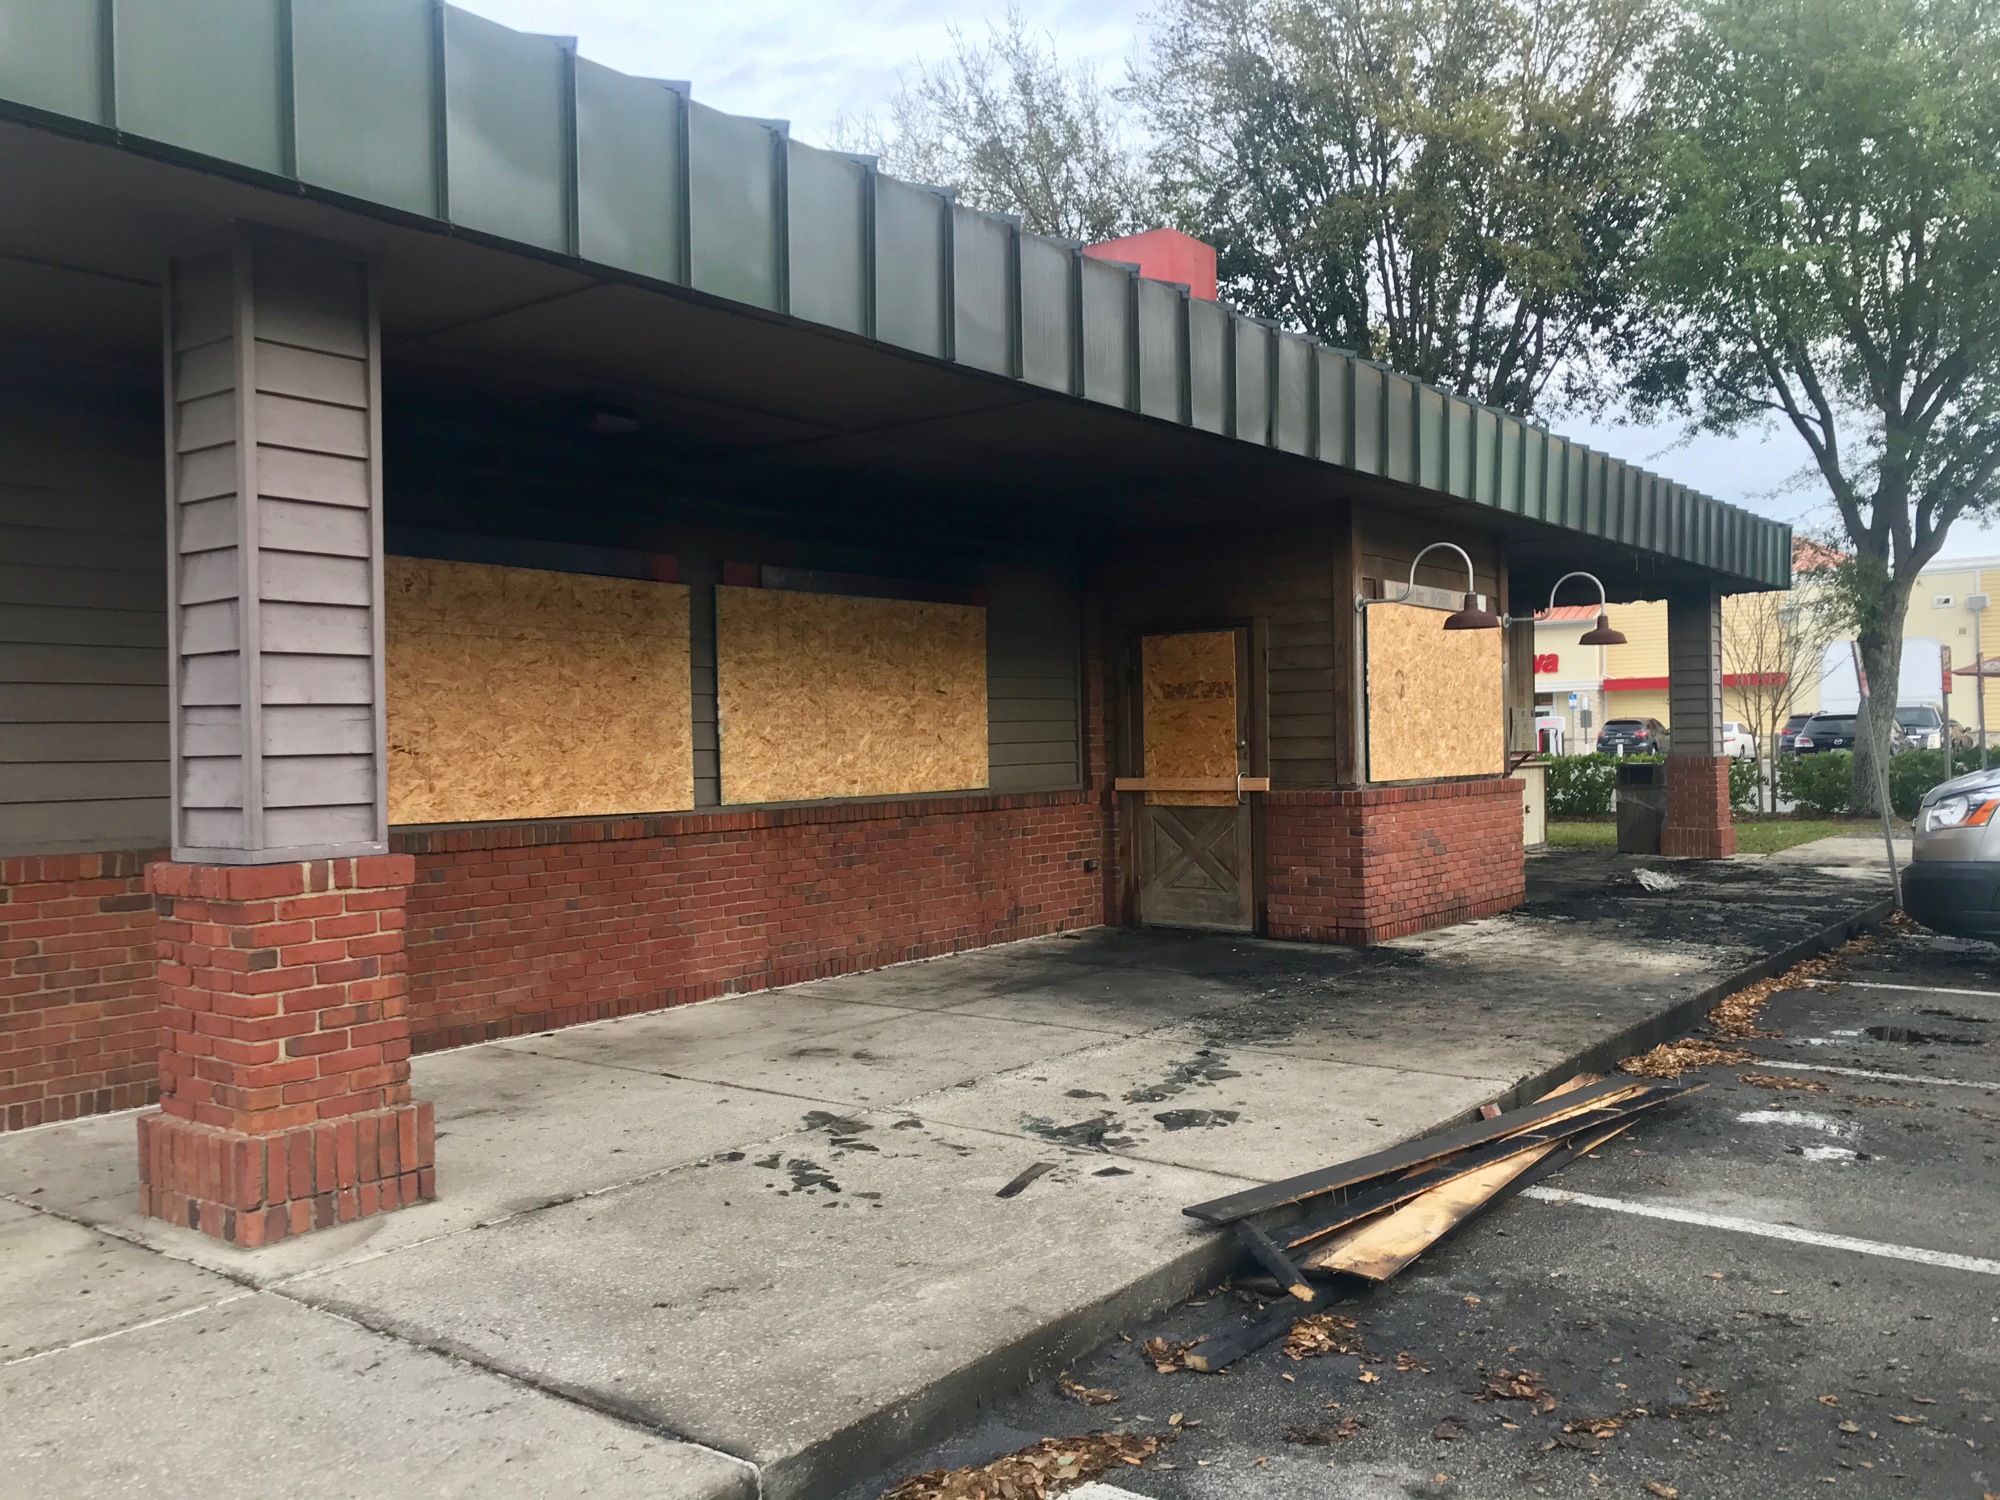 Windows were boarded up Tuesday morning following the Monday night fire at Bono's Pit Bar-B-Q on Gate Parkway.